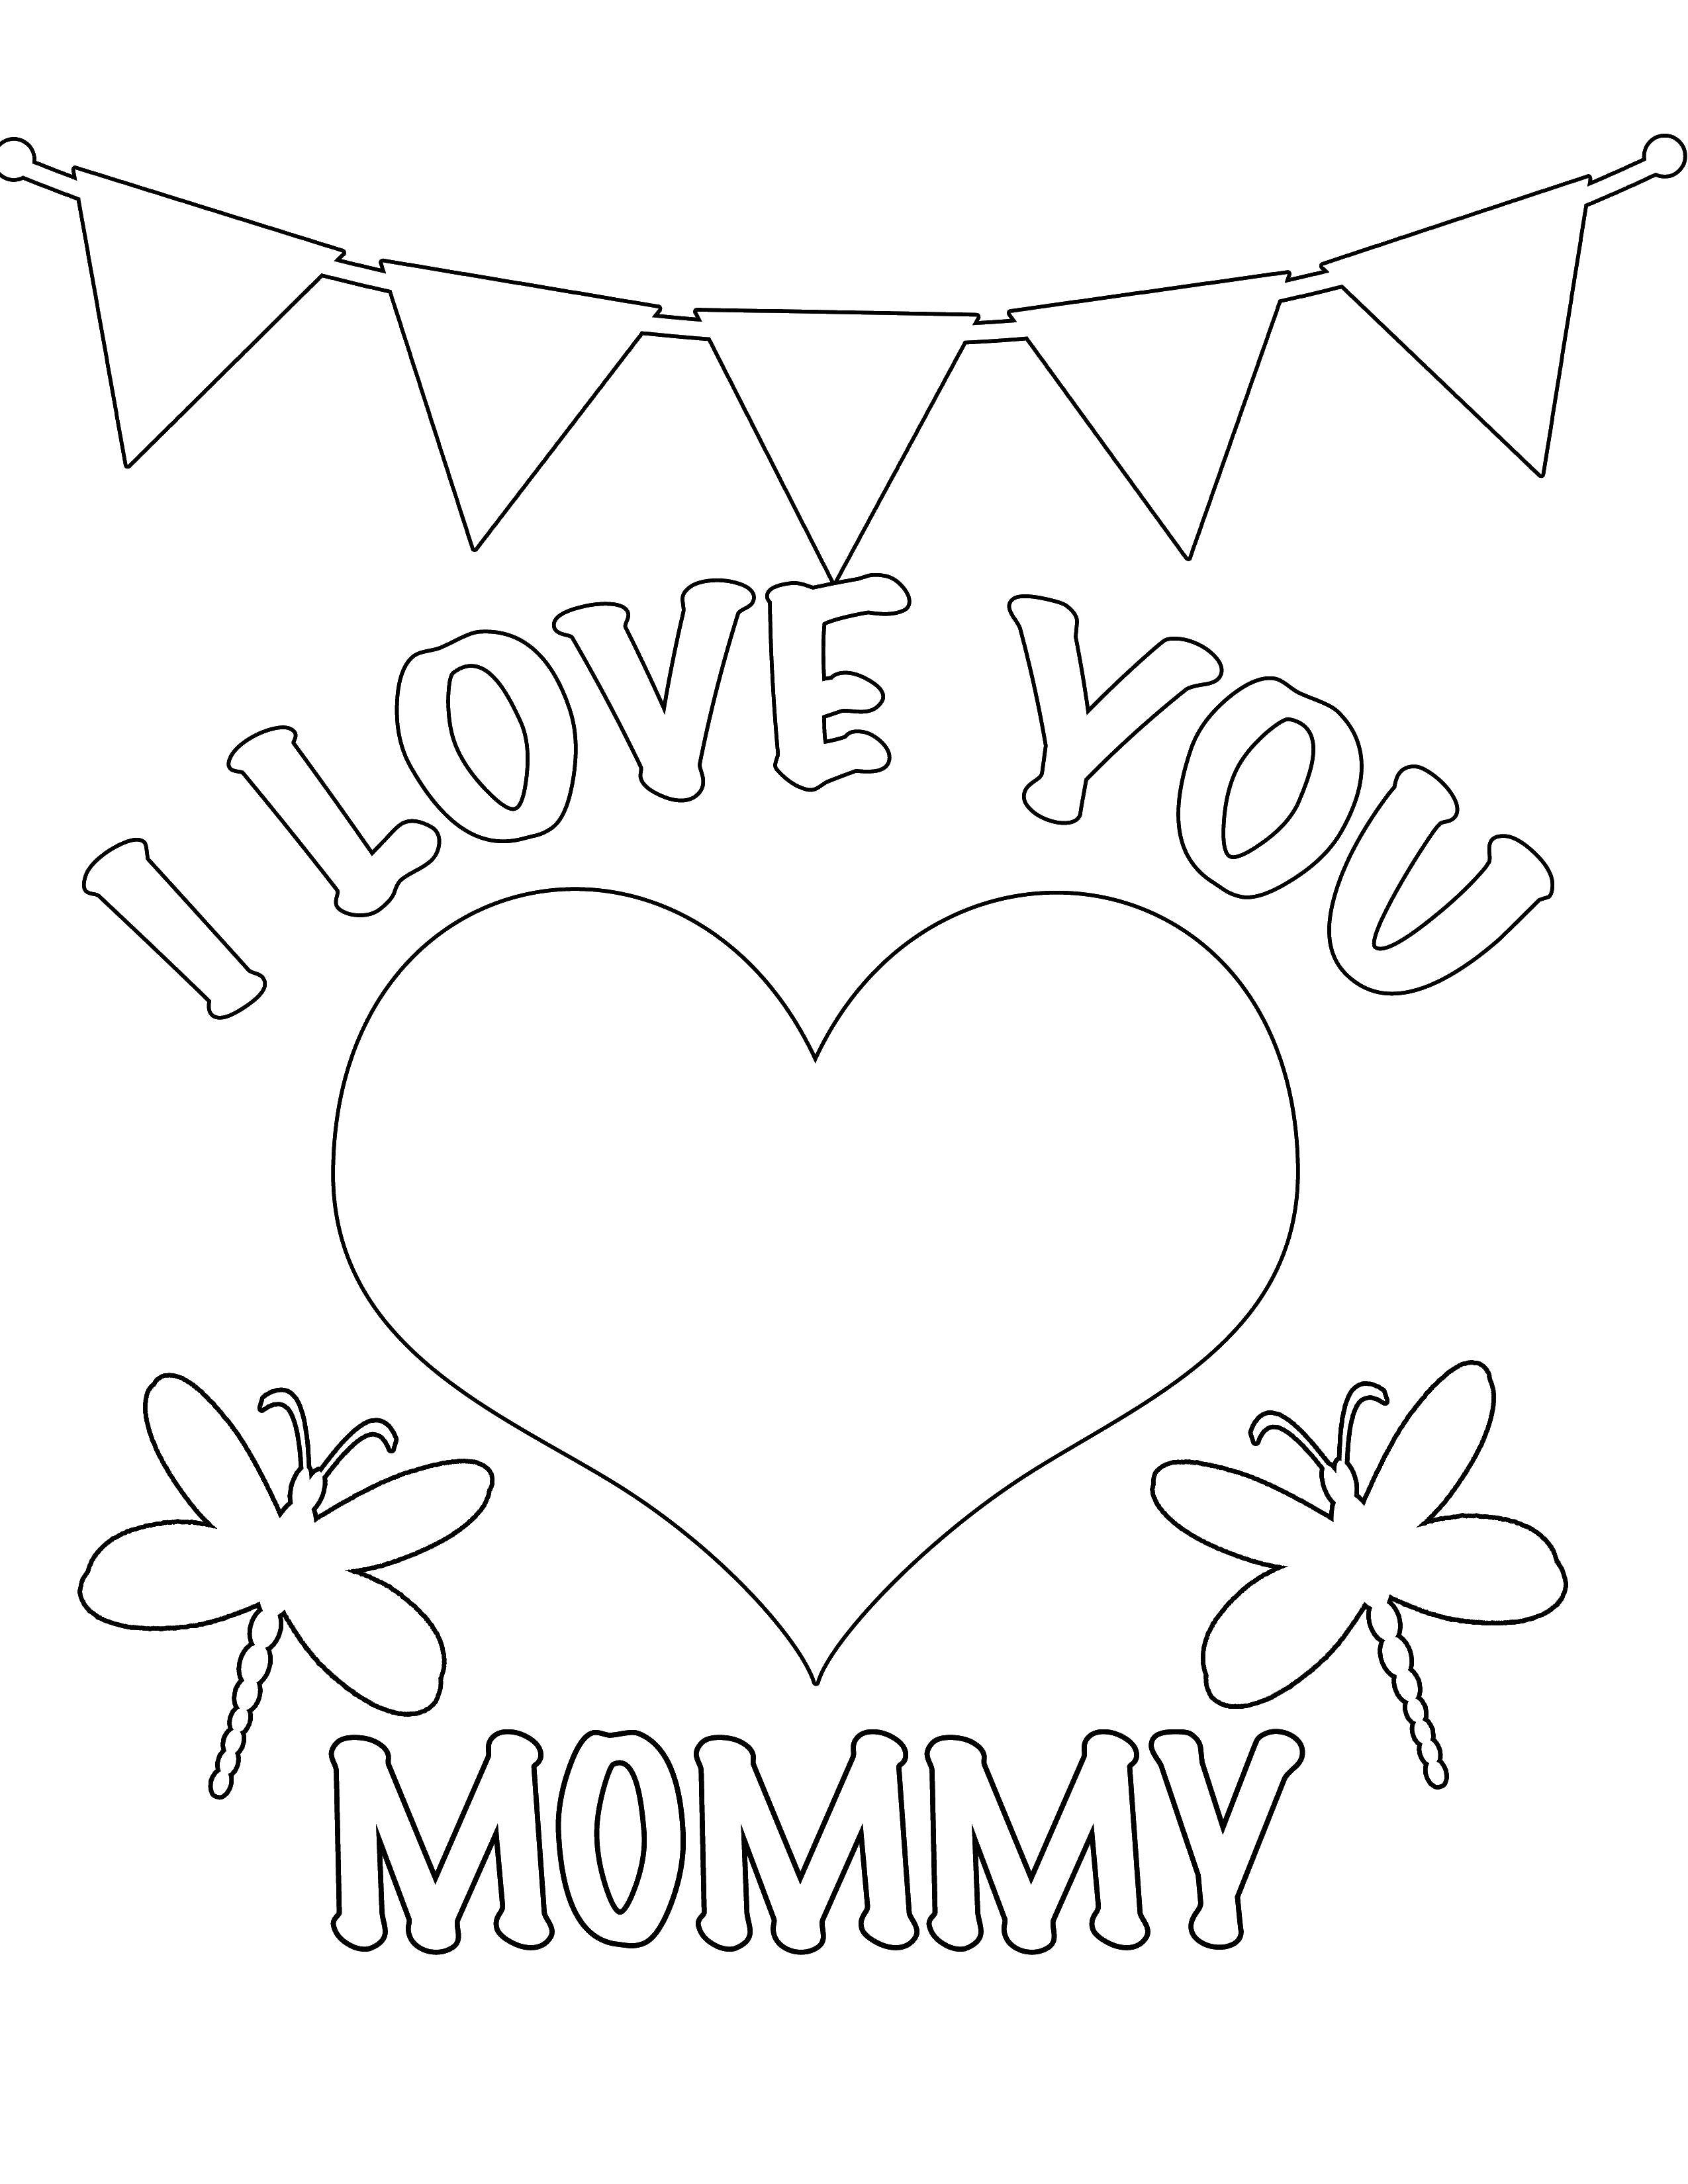 Coloring I love you, mommy.. Category I love you. Tags:  I love you, love, heart.